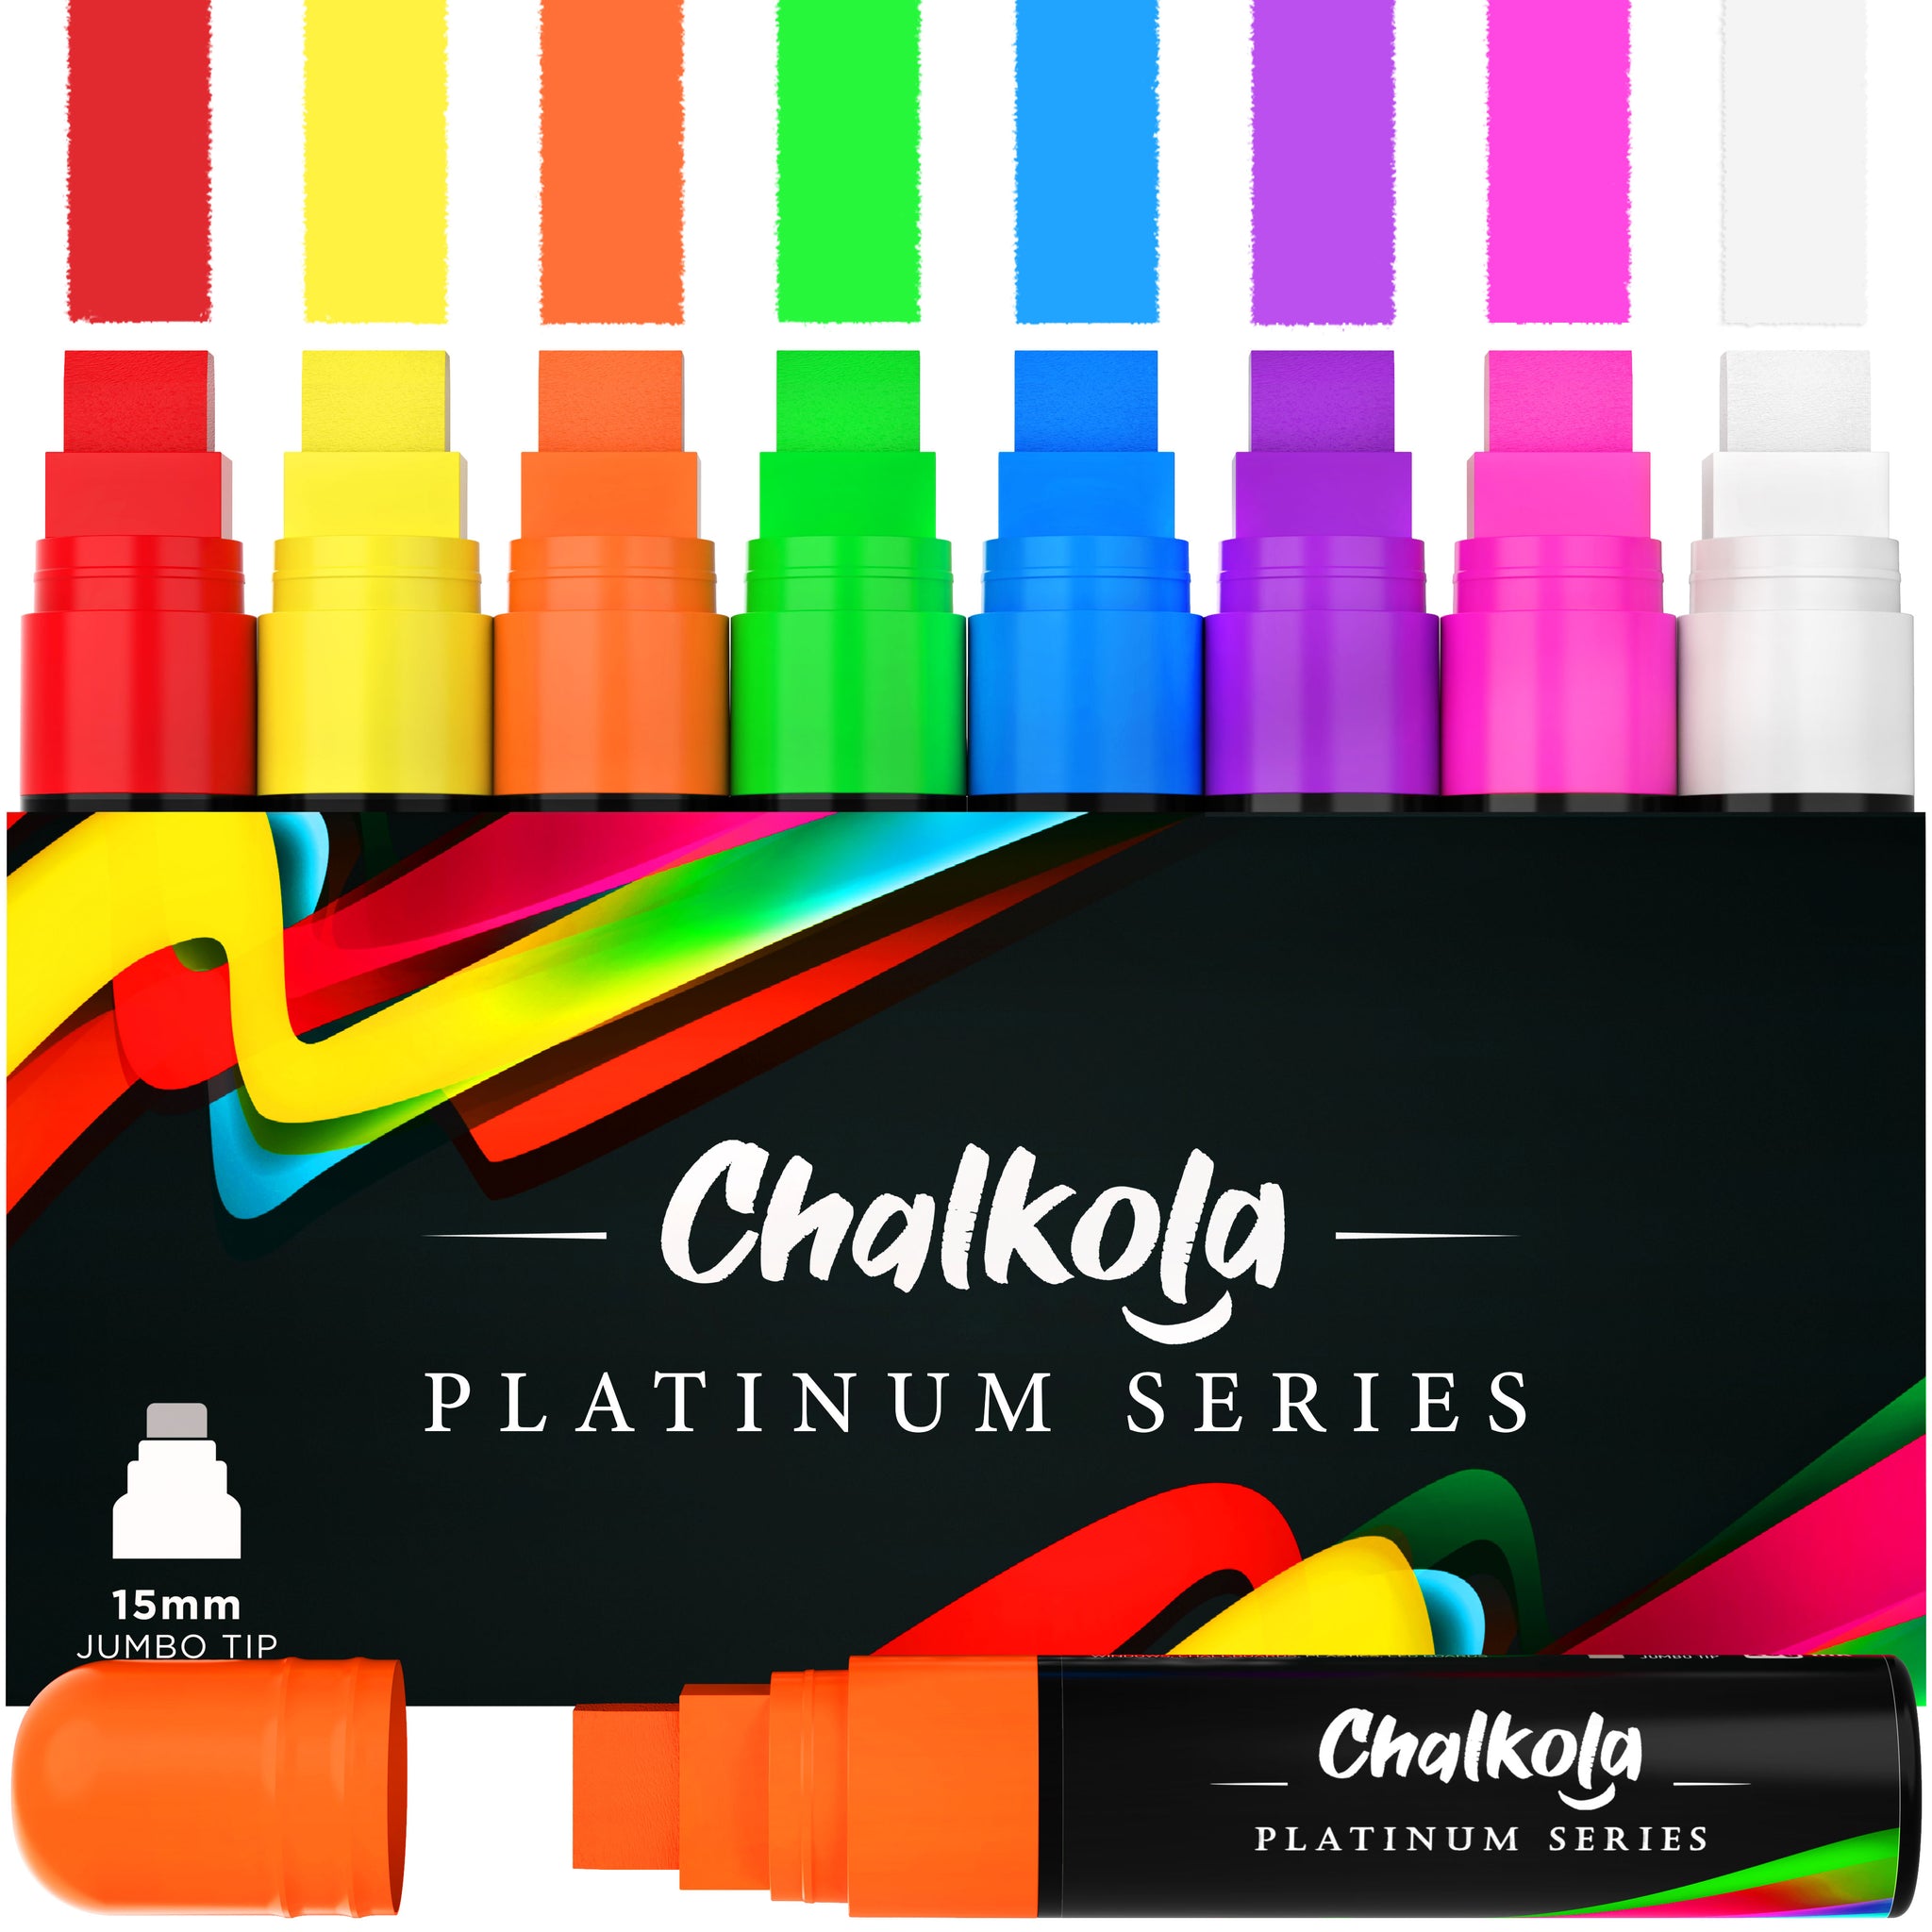  ARTISTRO 8 Colored Jumbo Chalk Markers - 15mm Neon Erasable  Window Markers for Cars Chalkboard Blackboard Glass Bistro - Easy to Erase  Chalk Pens Ideal for Teachers Kids Business 